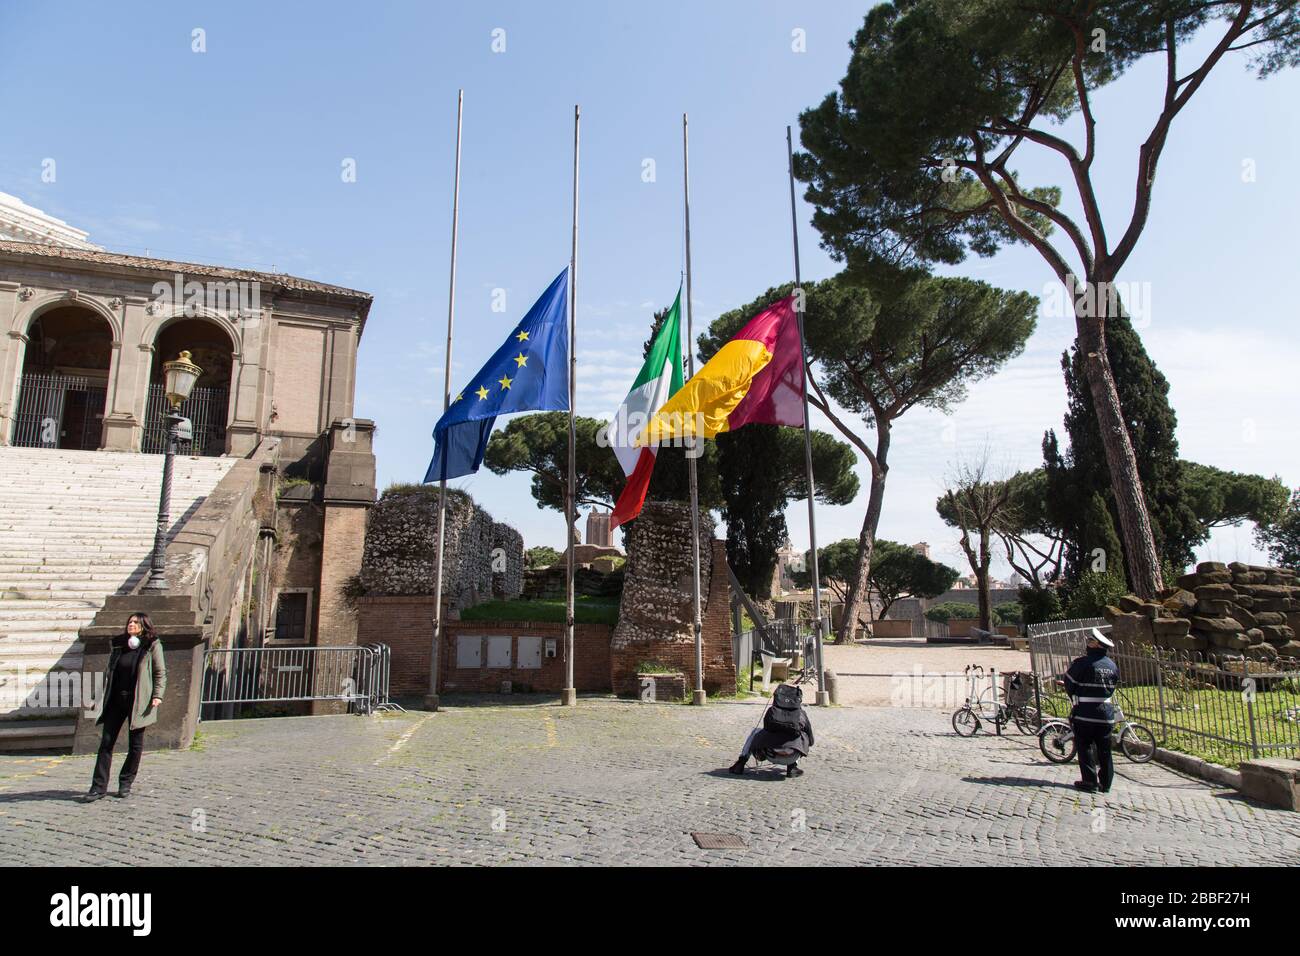 Roma, Italy. 31st Mar, 2020. Mayor of Rome, Virginia Raggi, in Piazza del Campidoglio, recalled victims of Covid-19 pandemic with a minute's silence. (Photo by Matteo Nardone/Pacific Press) Credit: Pacific Press Agency/Alamy Live News Stock Photo